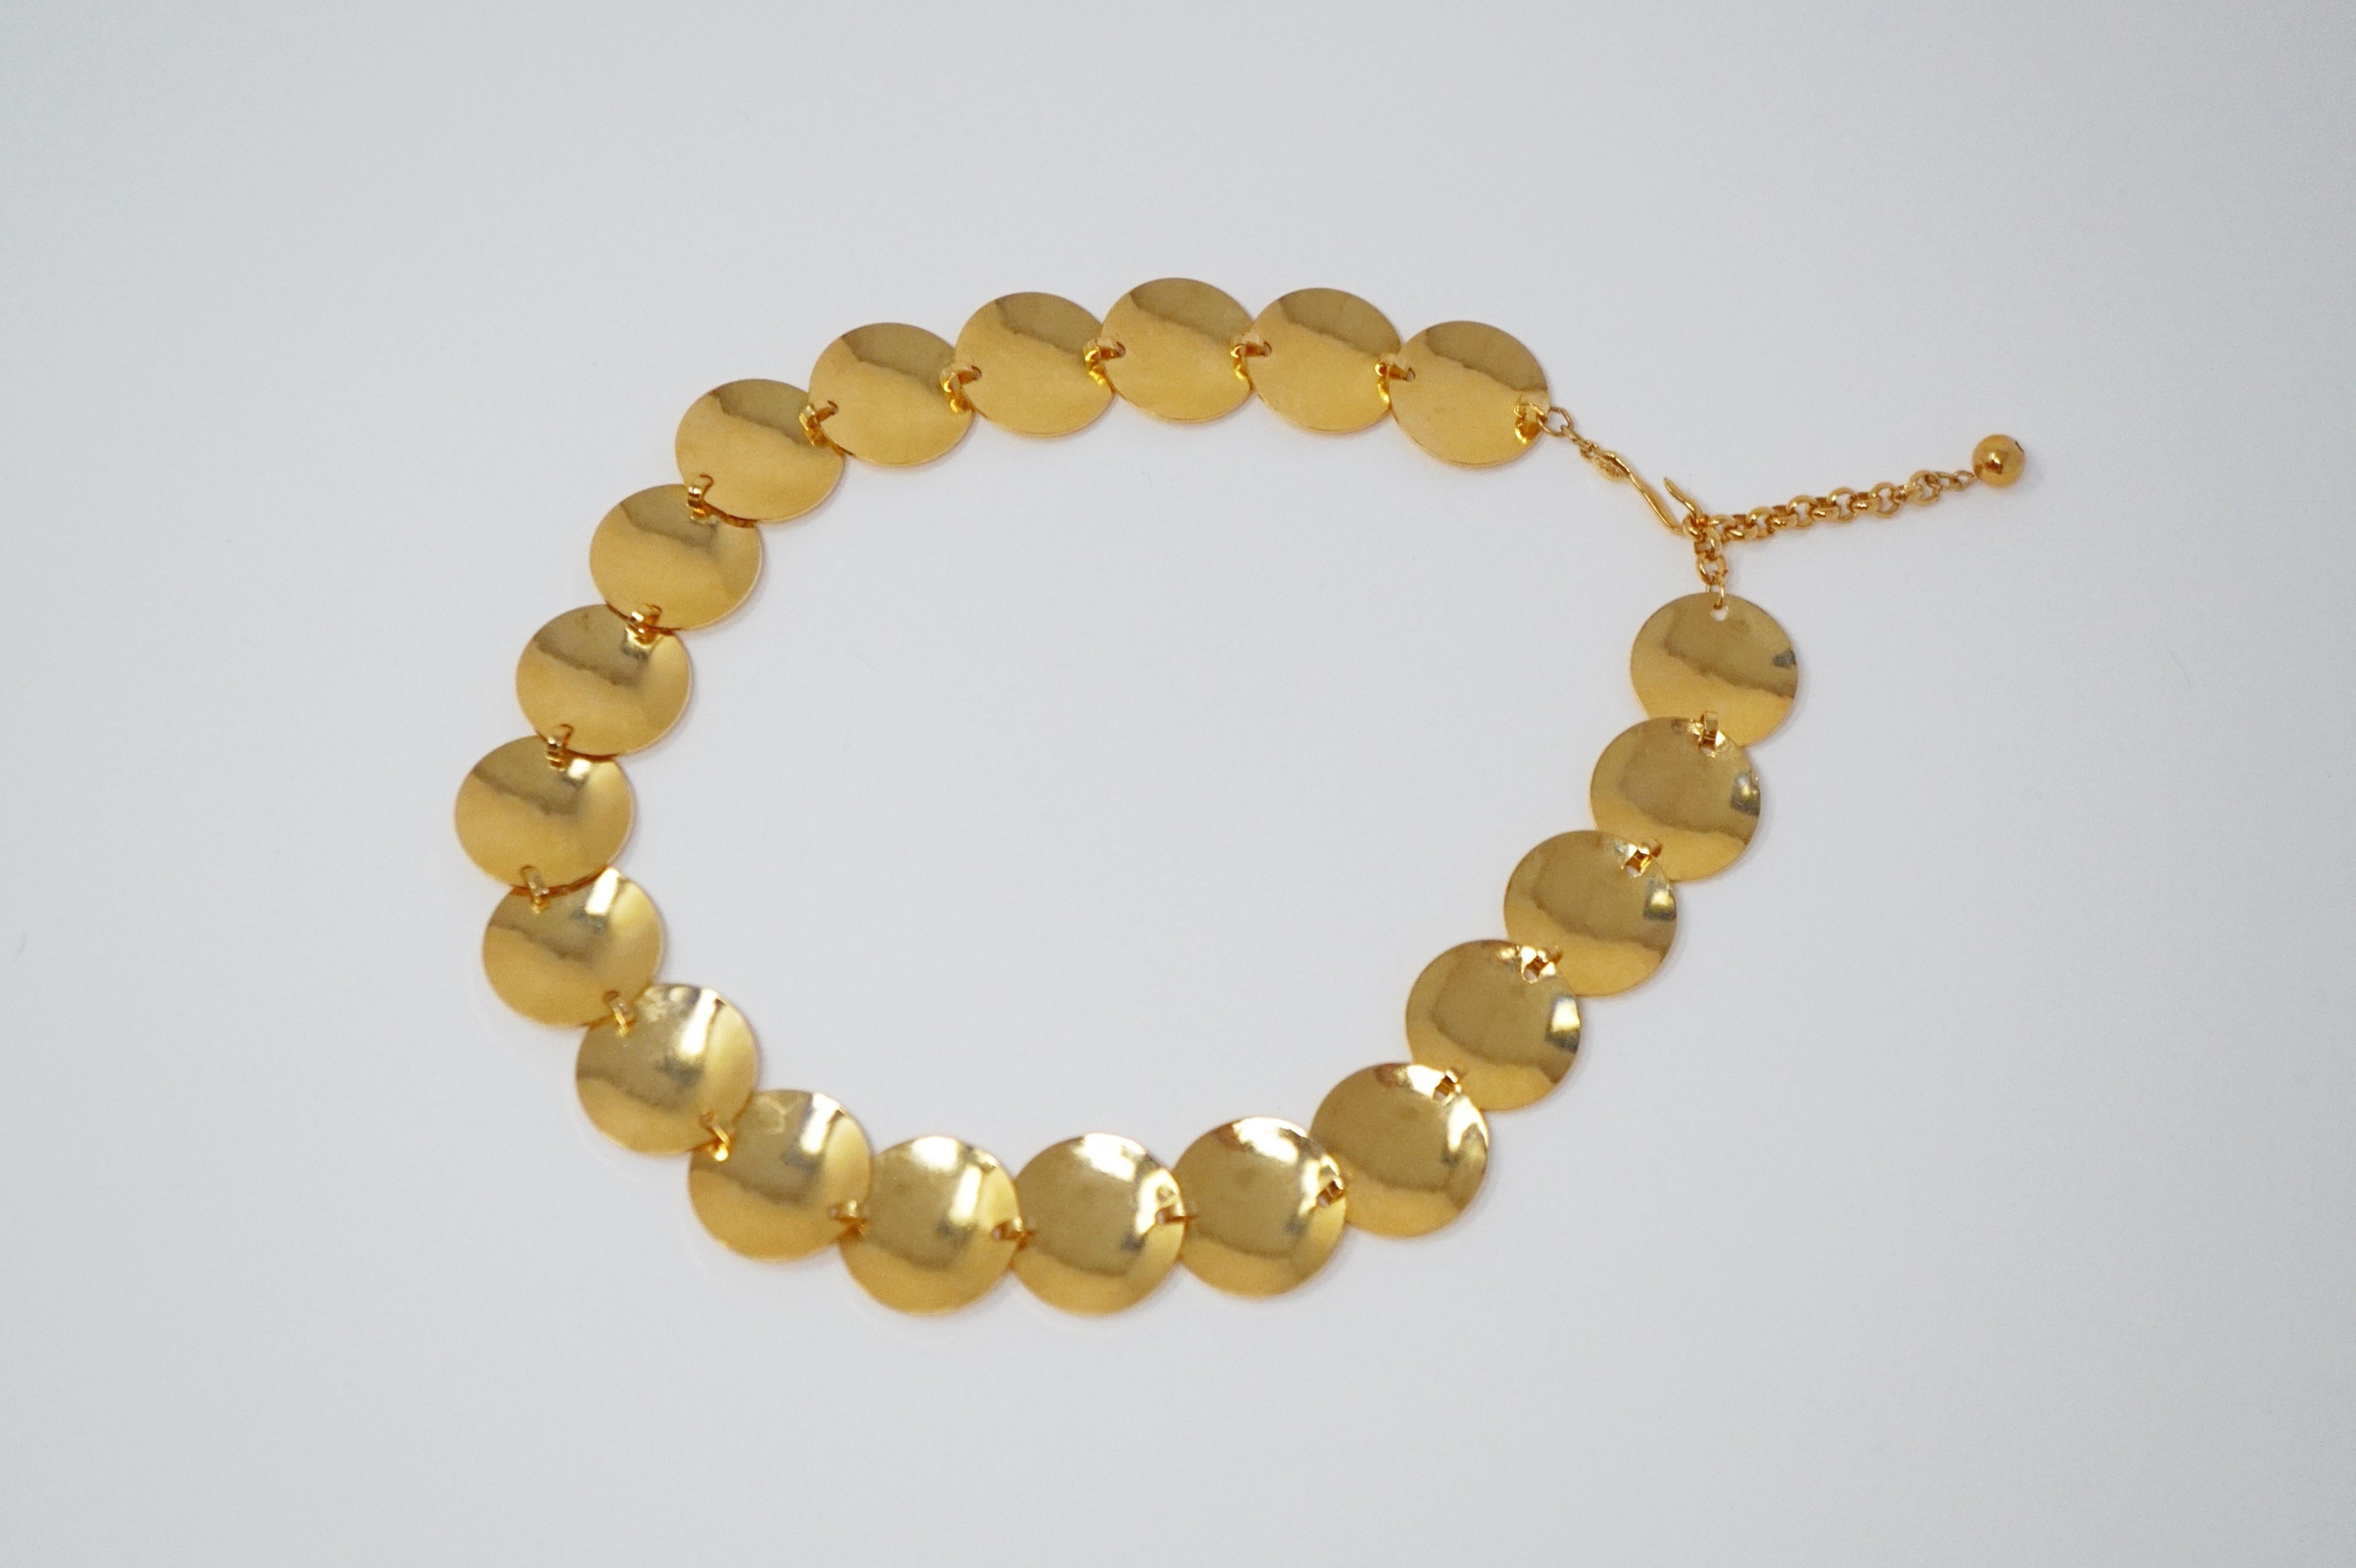 Women's Gilt Hammered Disc Statement Necklace by Napier, Signed, circa 1980